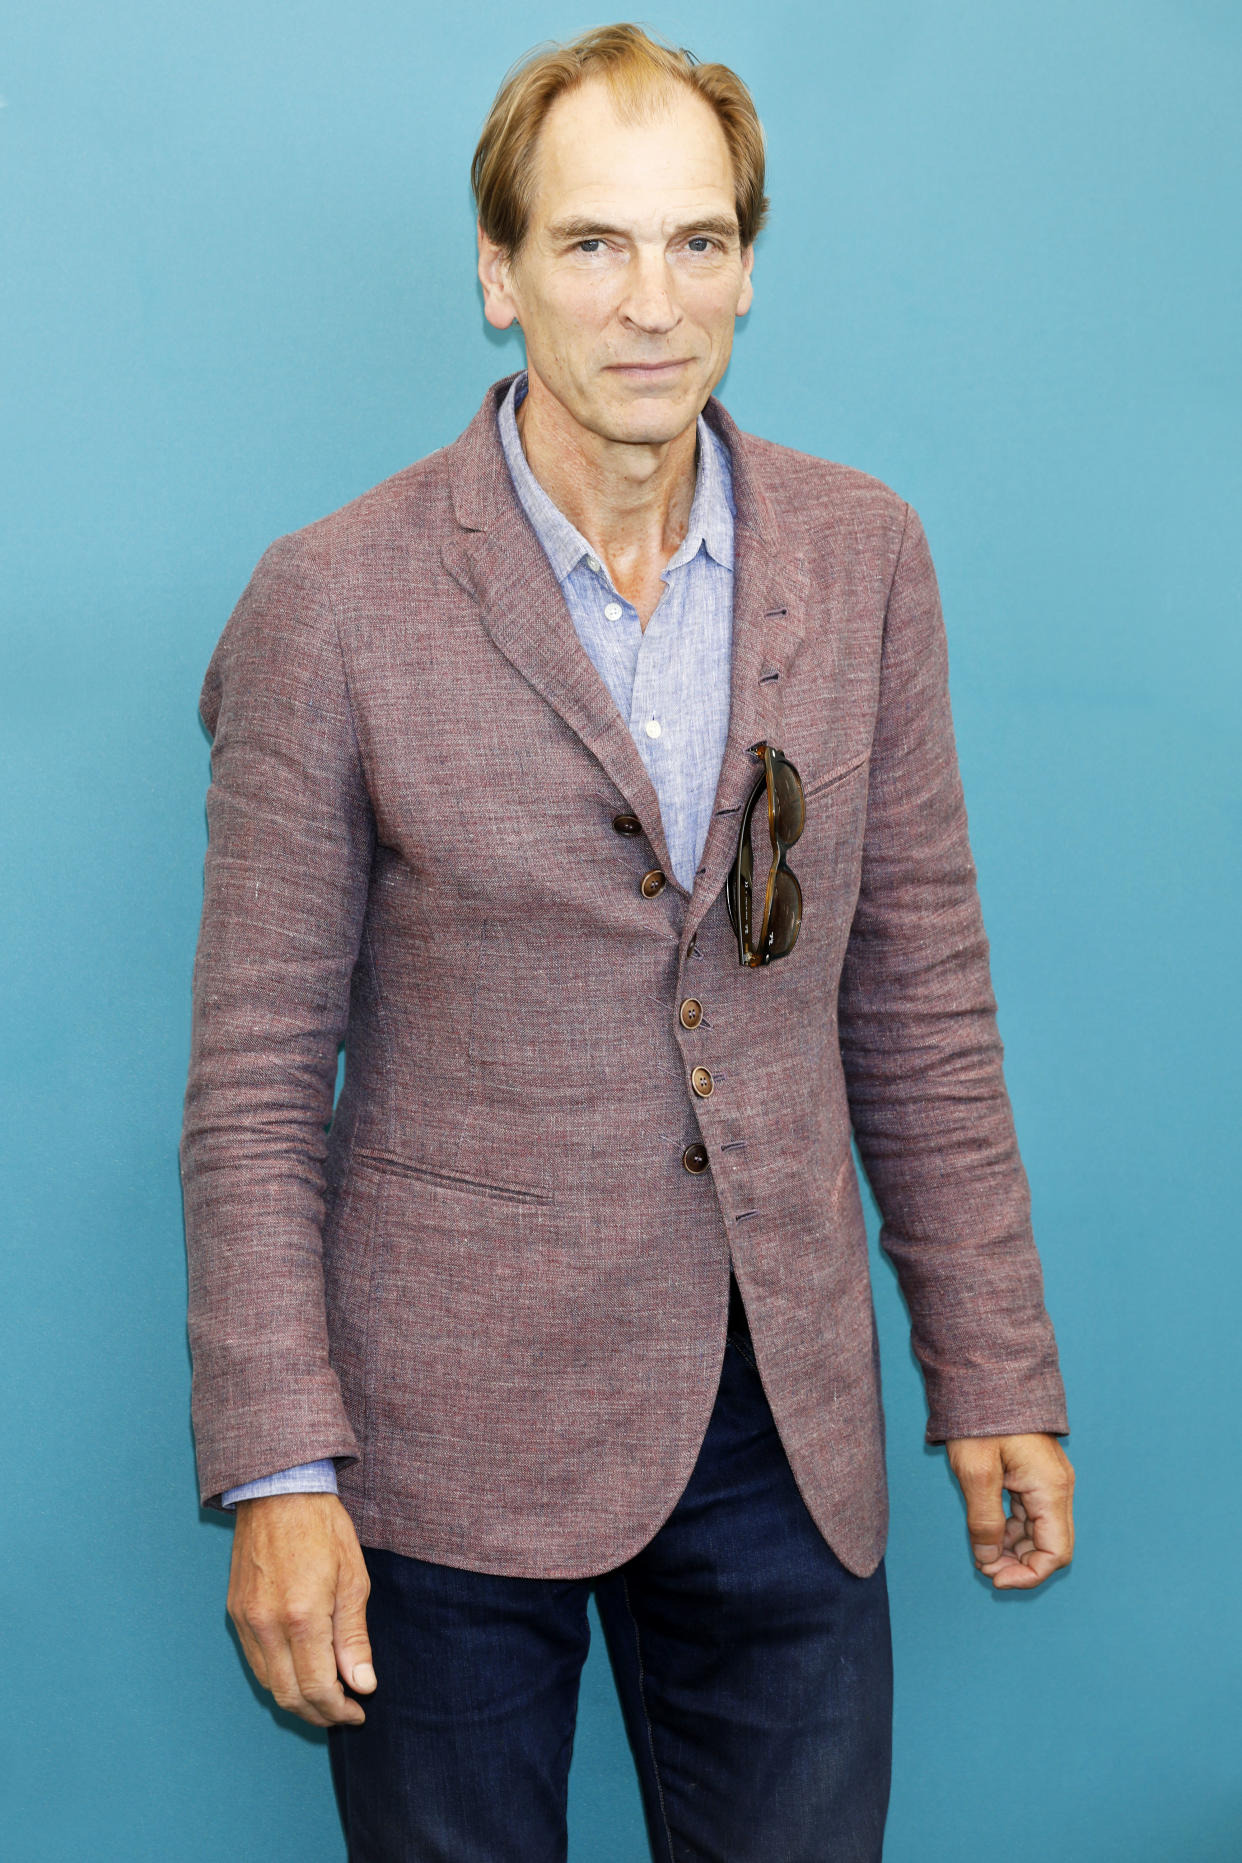 Julian Sands attends the photo call for 'The Painted Bird' during the 76th Venice Film Festival on September 3, 2019 in Venice, Italy.  (Kurt Krieger / Corbis via Getty Images)